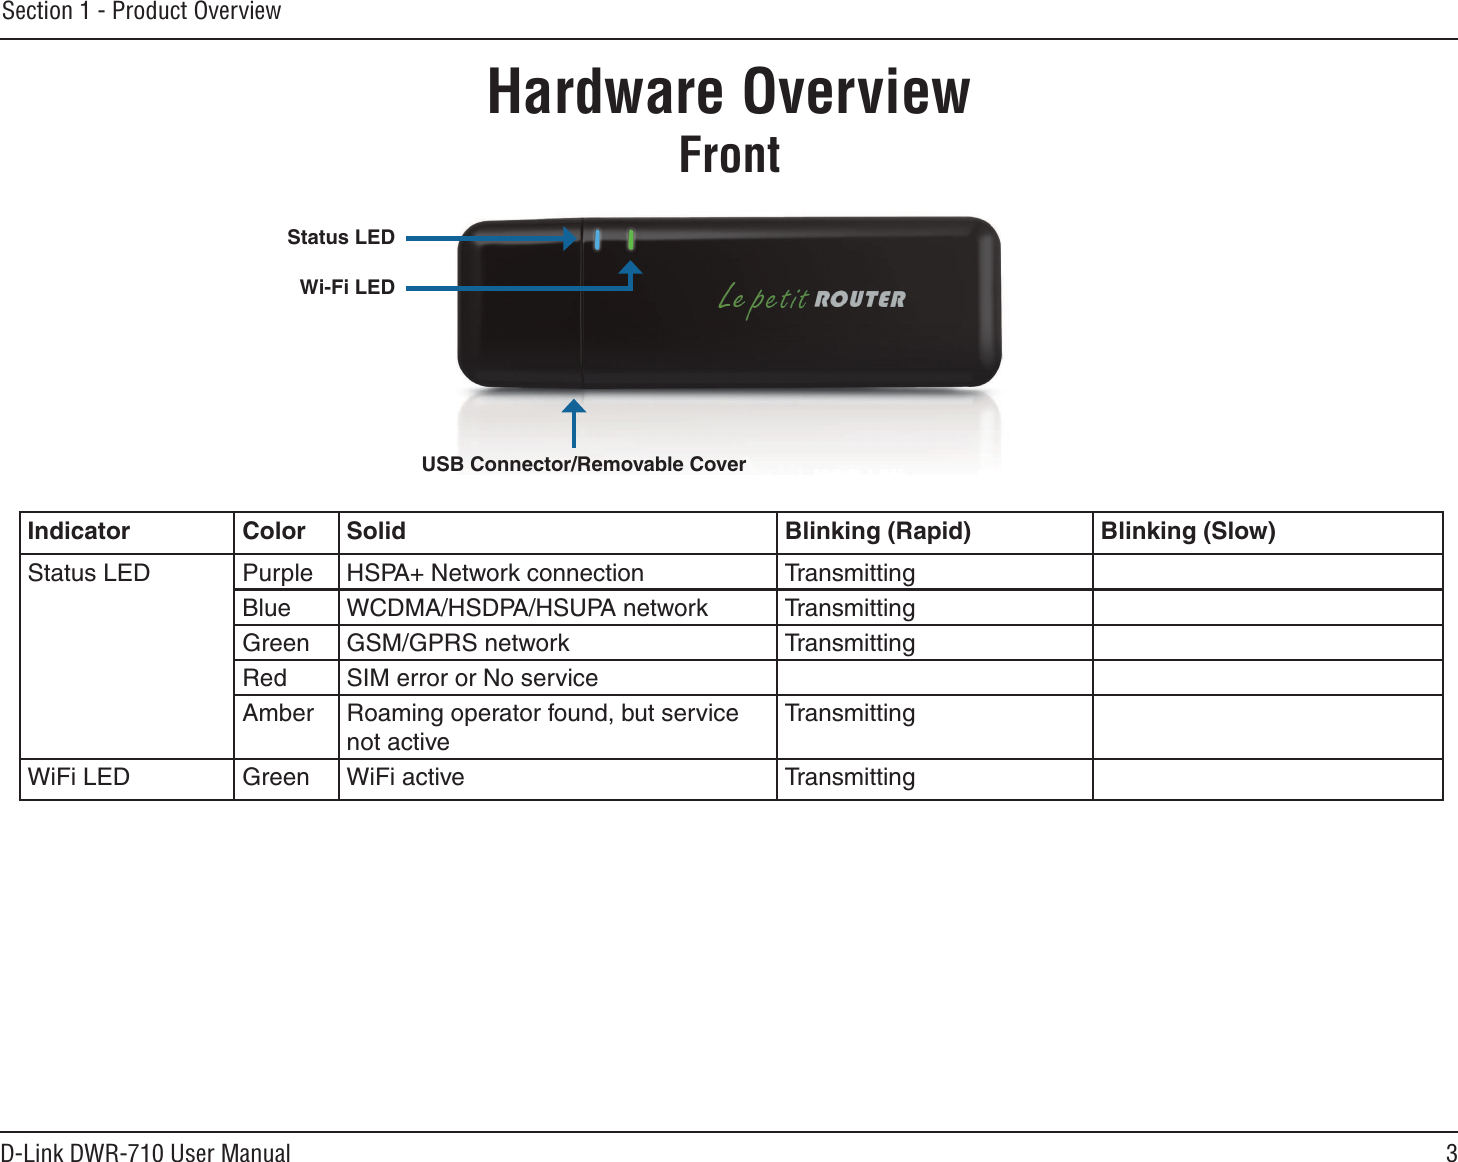 3D-Link DWR-710 User ManualSection 1 - Product Overview Hardware OverviewFrontWi-Fi LEDStatus LEDIndicator Color Solid Blinking (Rapid) Blinking (Slow)Status LED Purple HSPA+ Network connection TransmittingBlue WCDMA/HSDPA/HSUPA network TransmittingGreen GSM/GPRS network TransmittingRed SIM error or No serviceAmber Roaming operator found, but service not activeTransmittingWiFi LED Green WiFi active TransmittingUSB Connector/Removable Cover